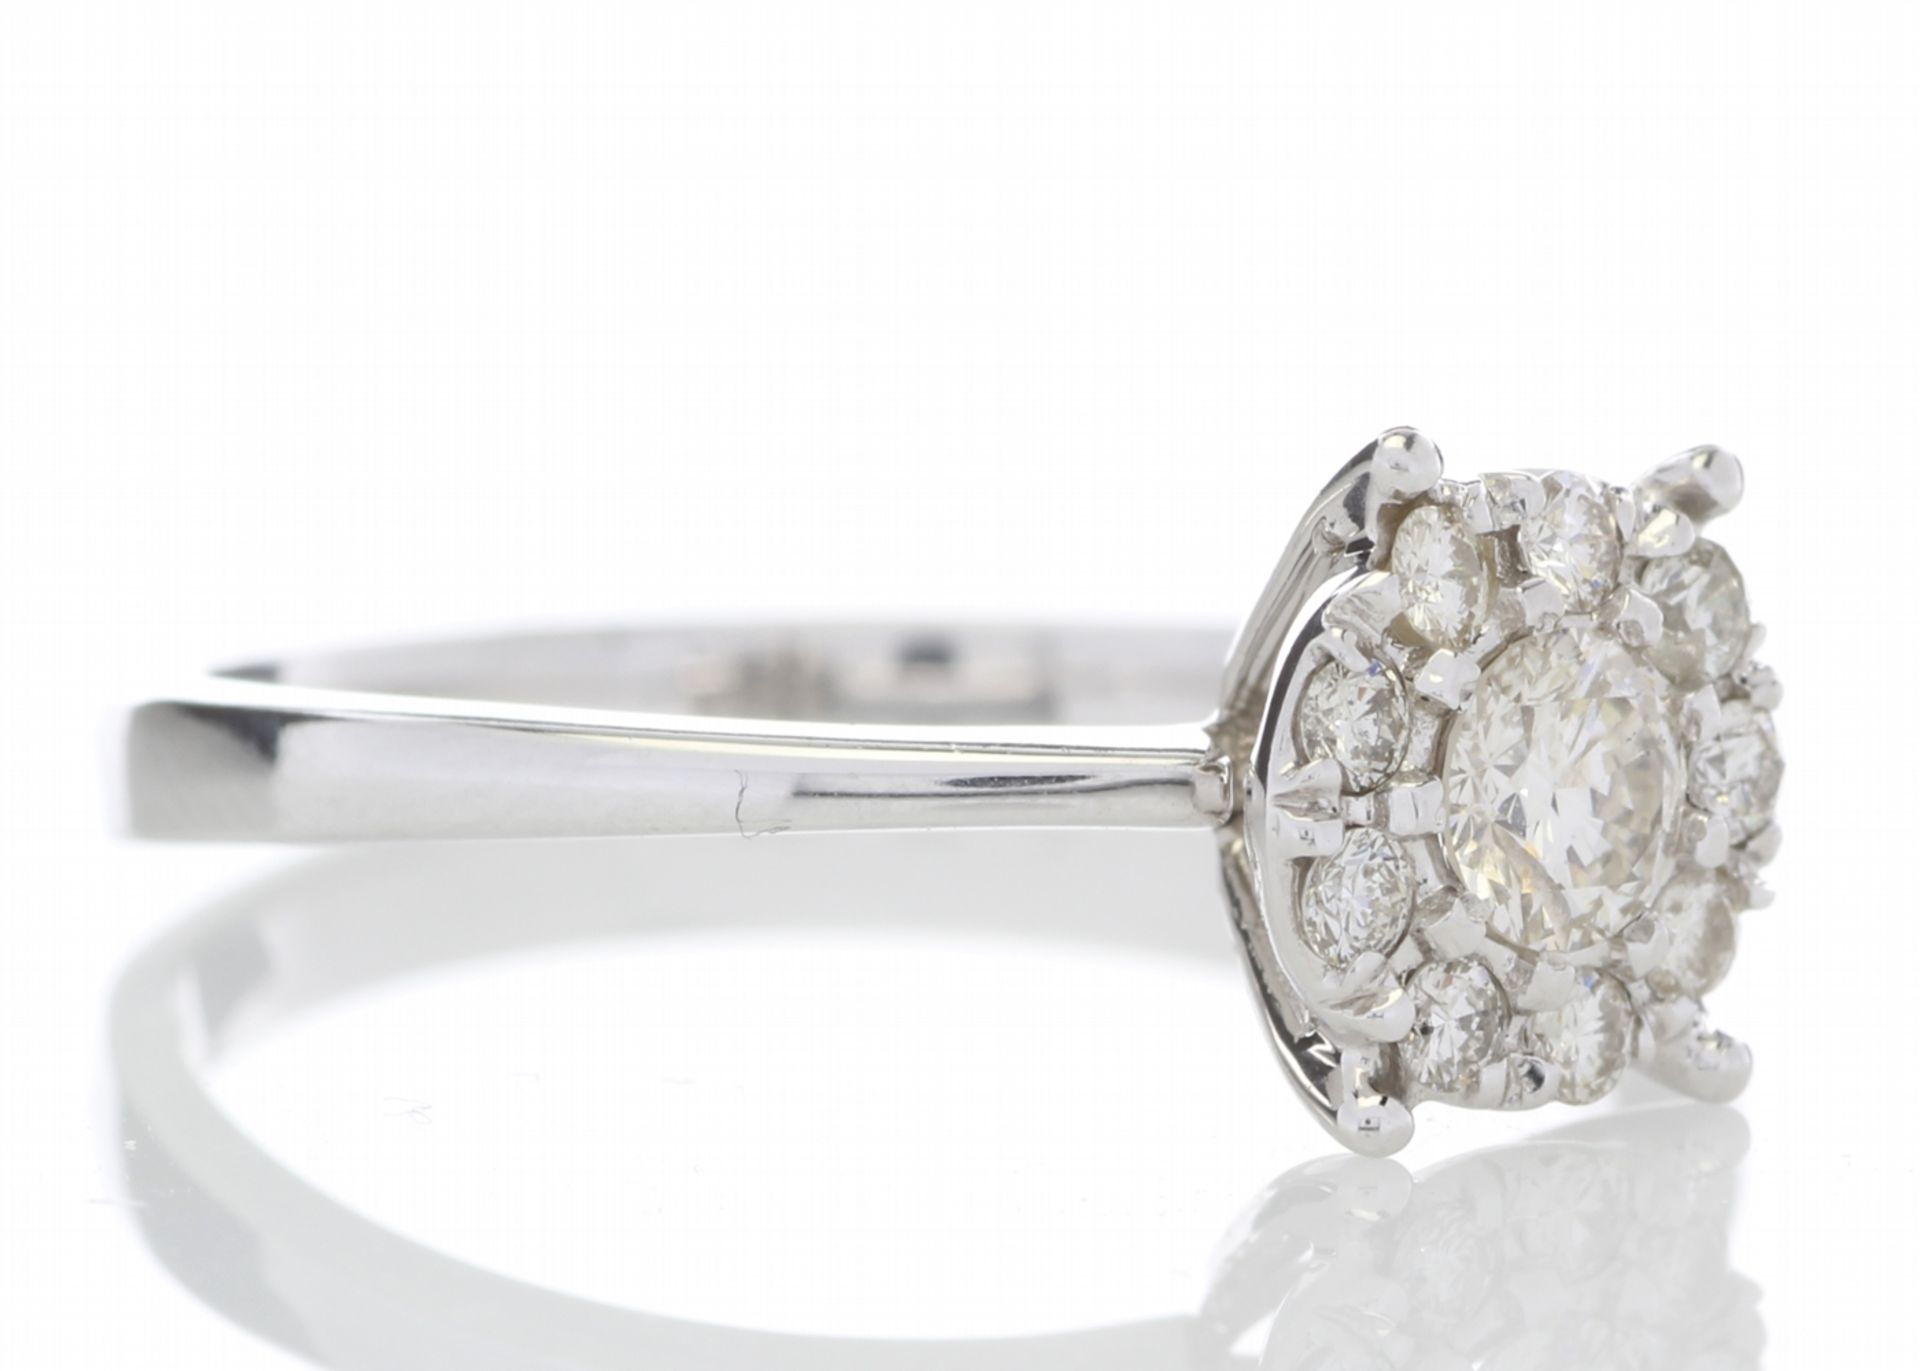 14ct Gold Flower Cluster Diamond Ring 0.50 Carats - Valued by GIE £5,995.00 - A modern classic style - Image 5 of 6